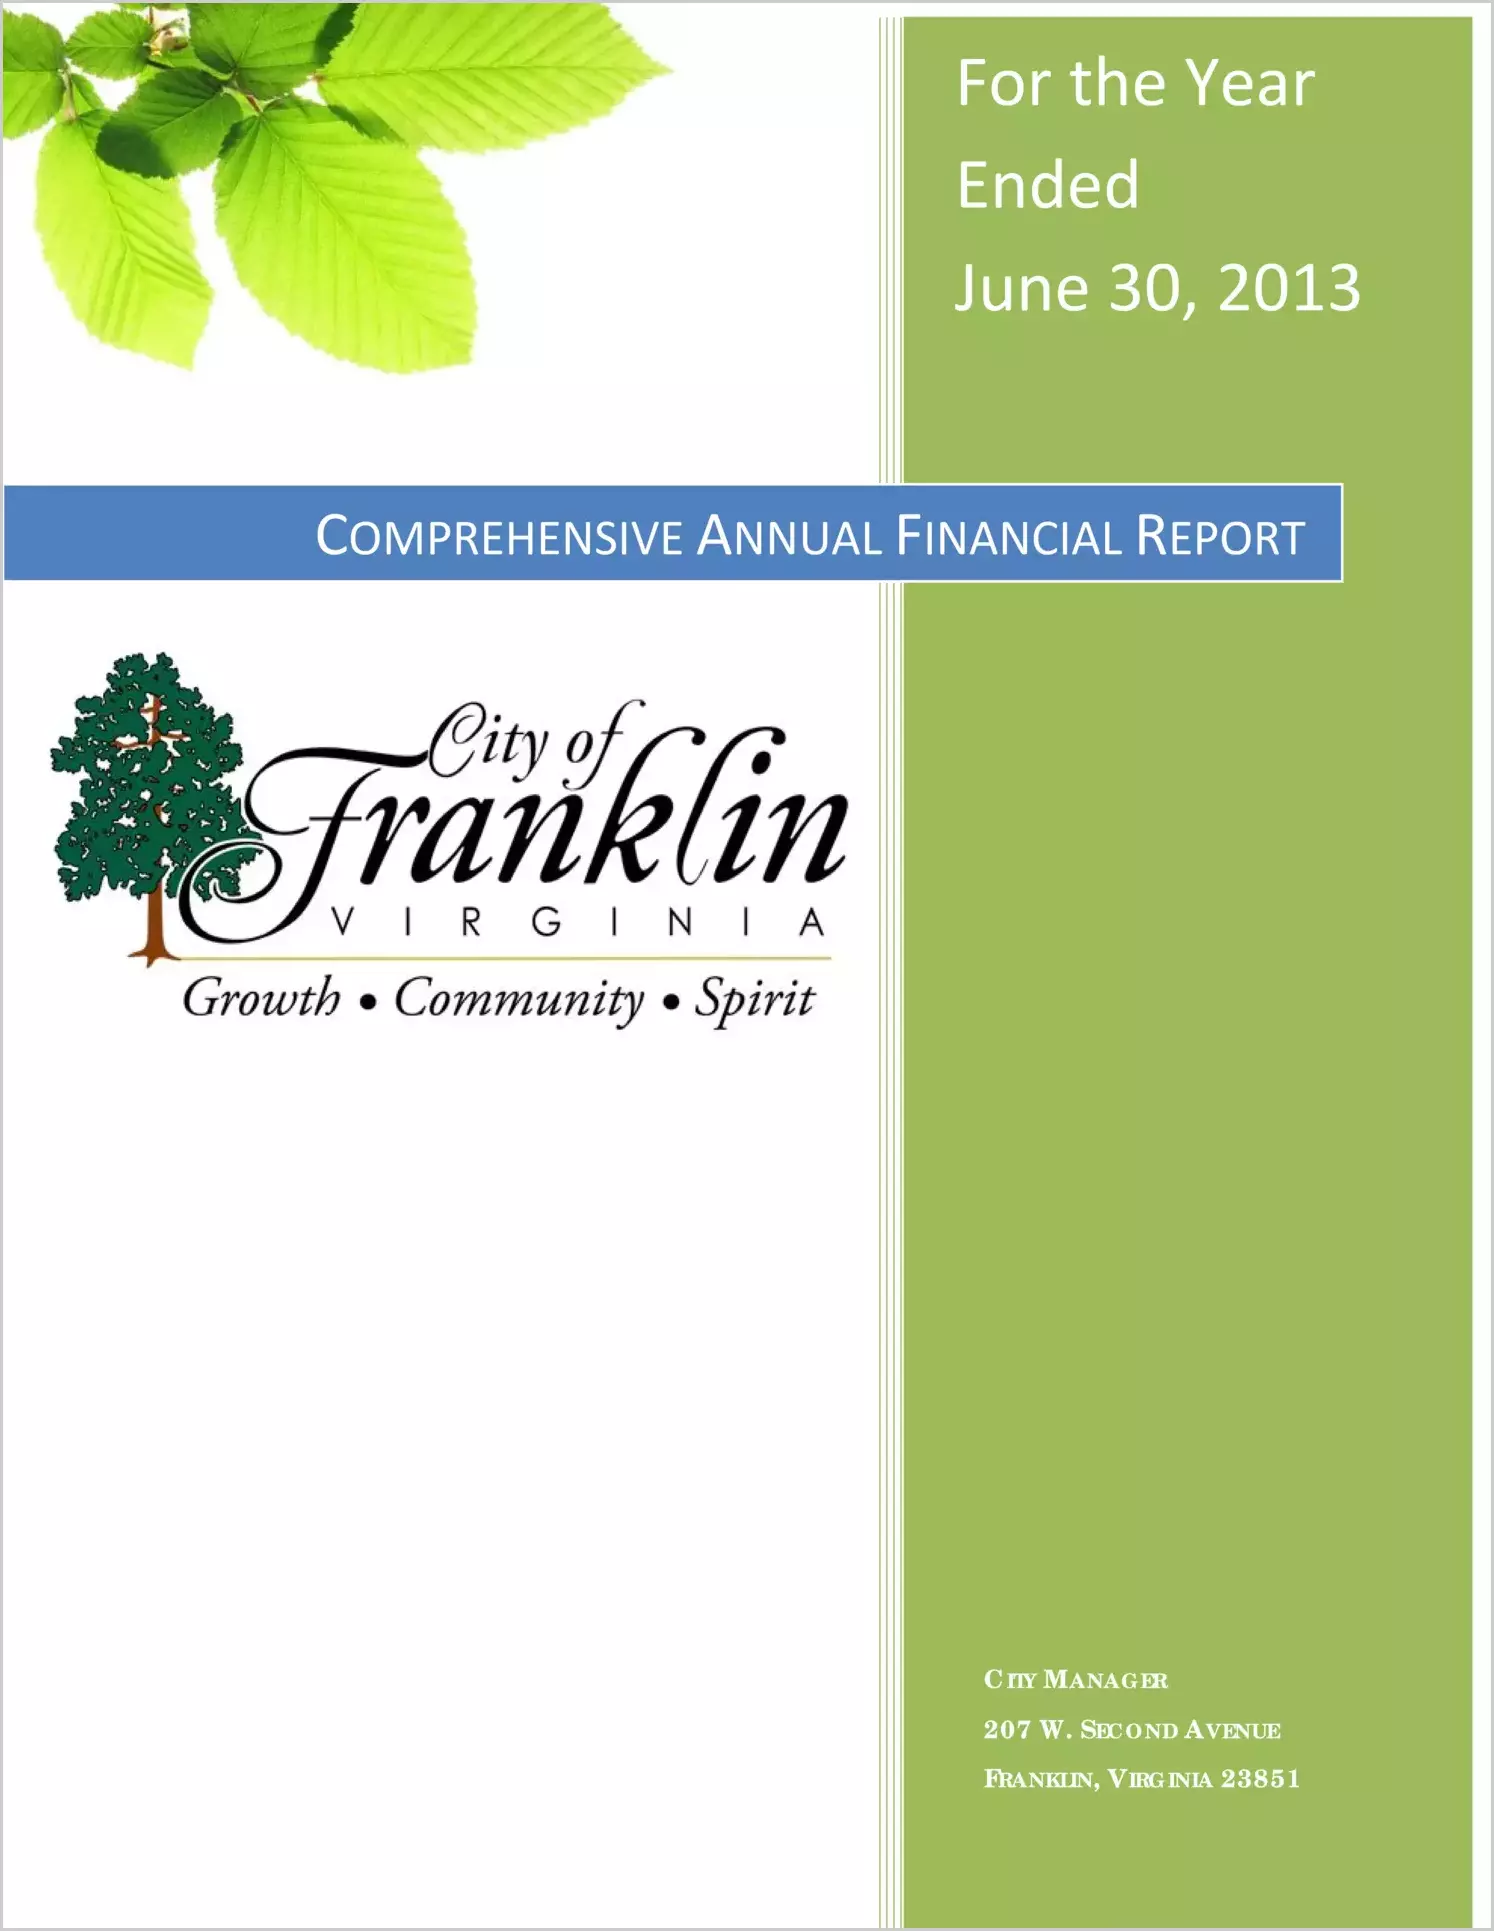 2013 Annual Financial Report for City of Franklin